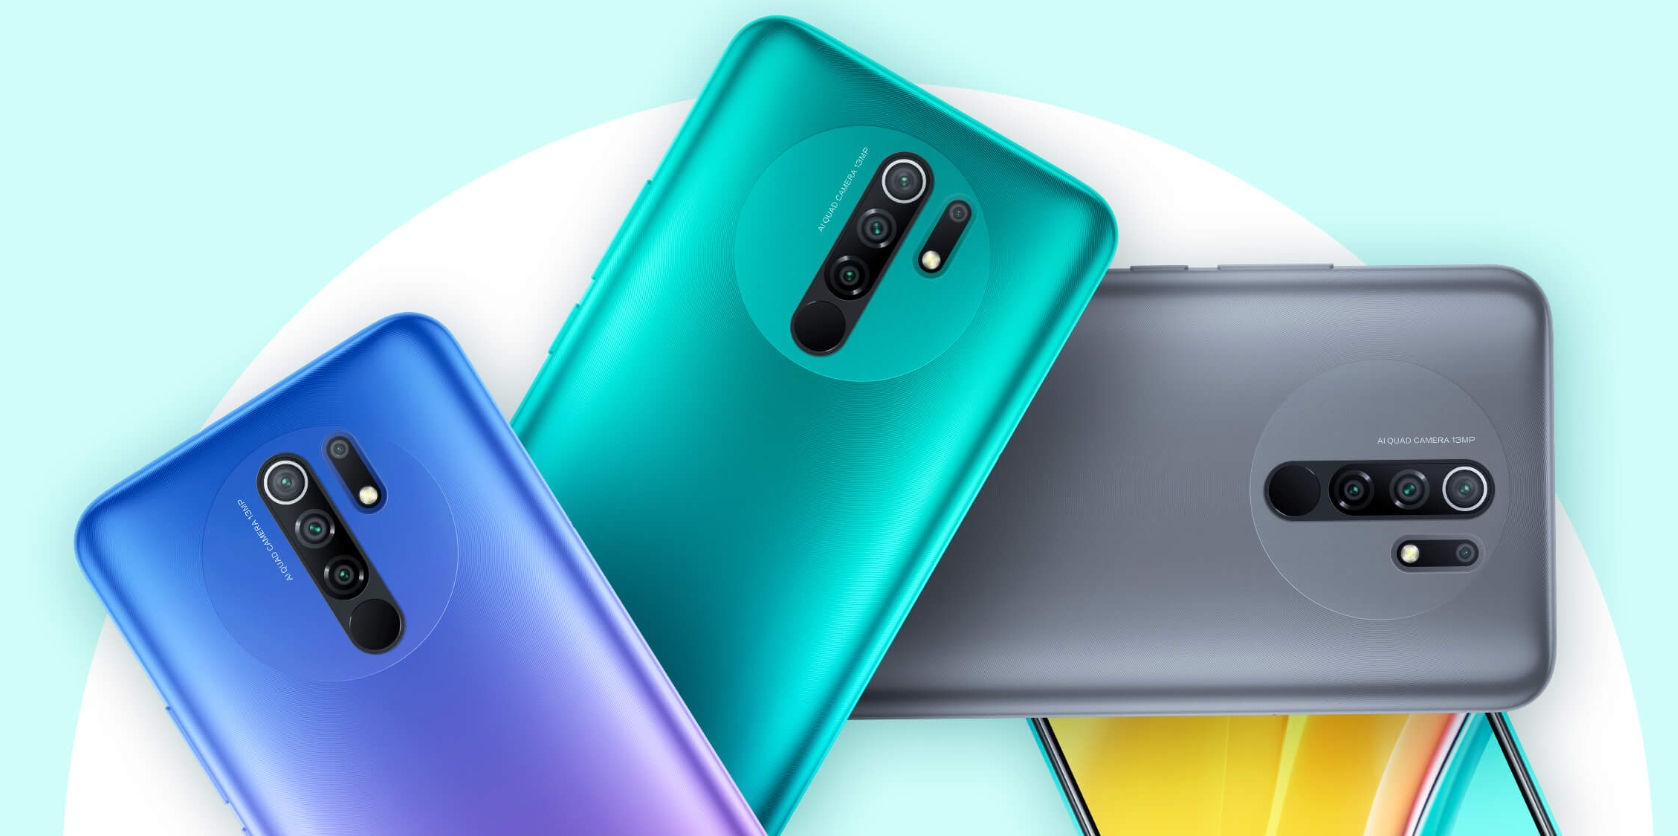 Xiaomi's budget Redmi 9 has arrived in Malaysia, going for as low ...